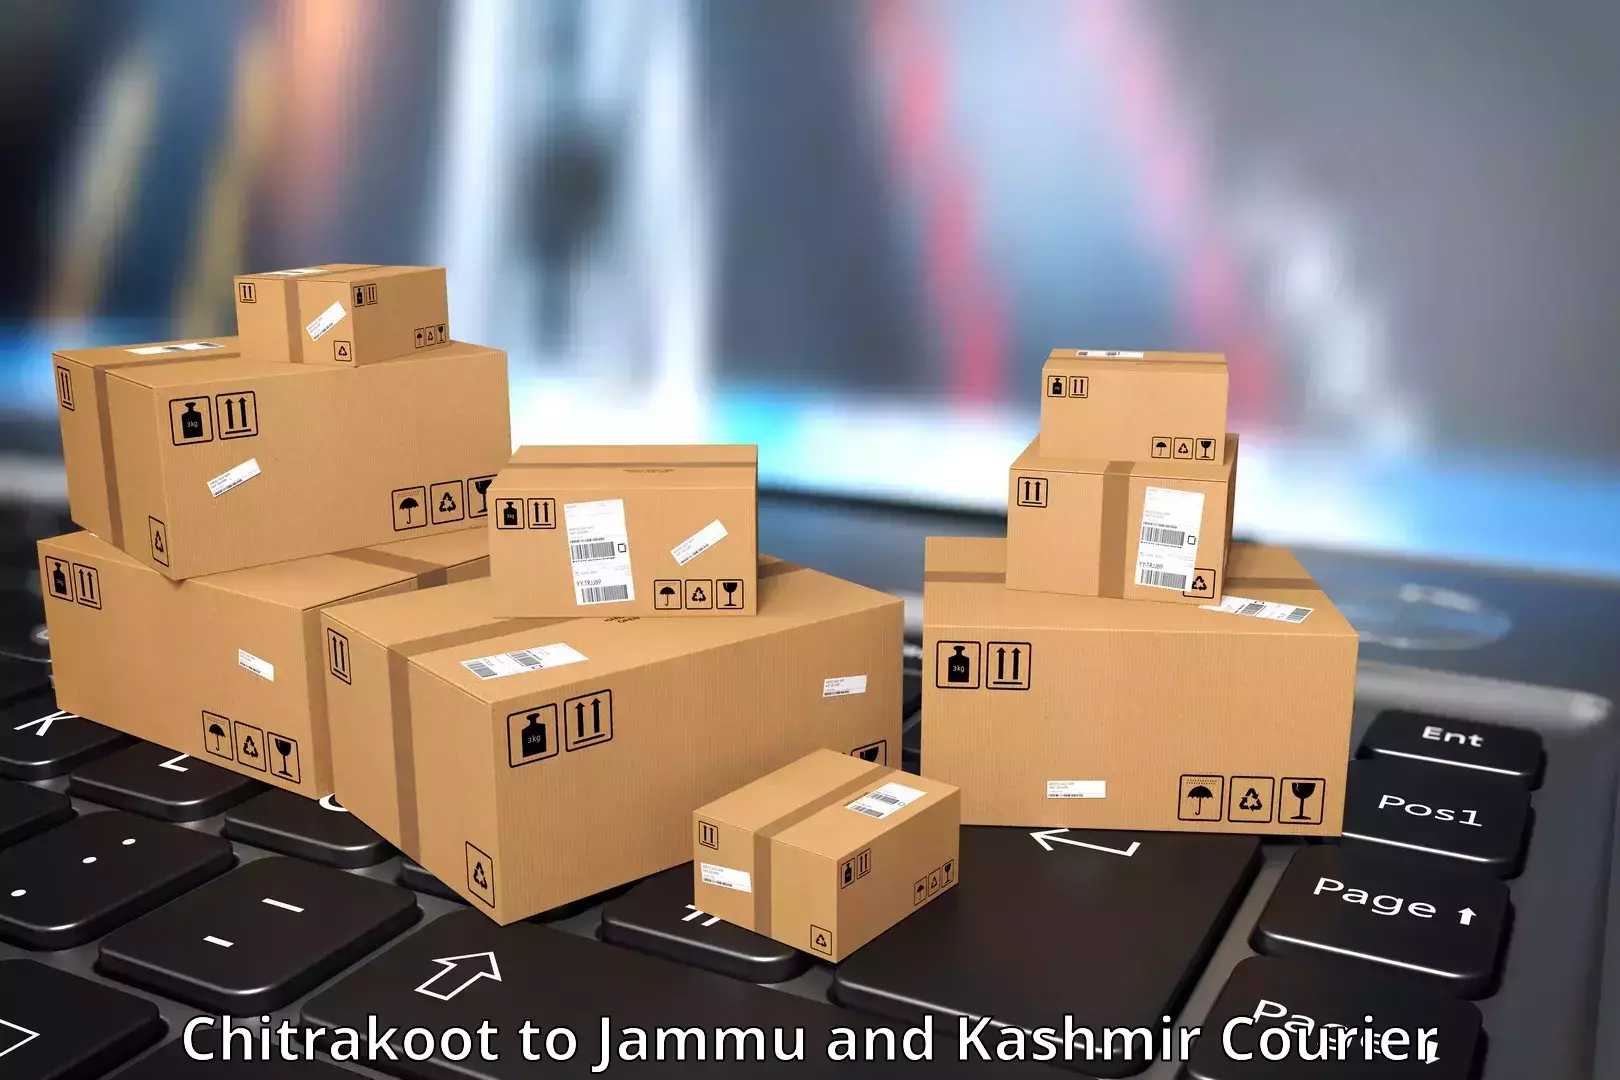 State-of-the-art courier technology Chitrakoot to Kulgam